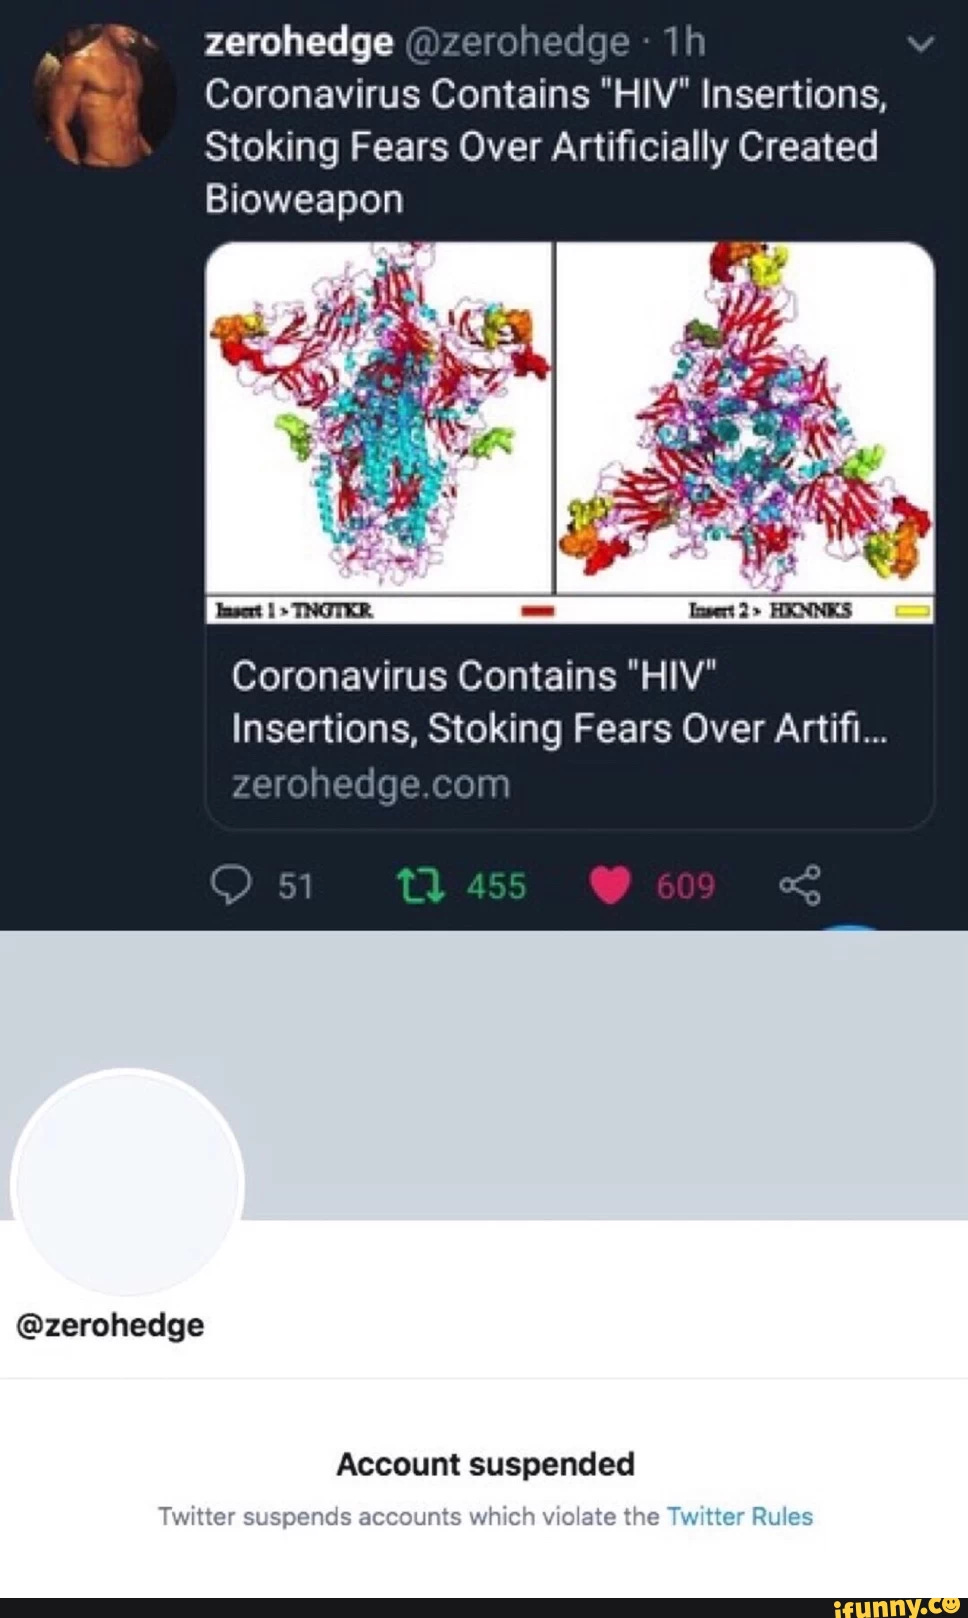 zerohedge @zerohedge Coronavirus Contains "HIV" Insertions, Stoking Fears Over Artificially Created Bioweapon Coronavirus Contains "HIV" Insertions, Stoking Fears Over Arrtifi... reroneag ym @zerohedge Account suspended Twitter suspends accounts which violate the Twitter Rules